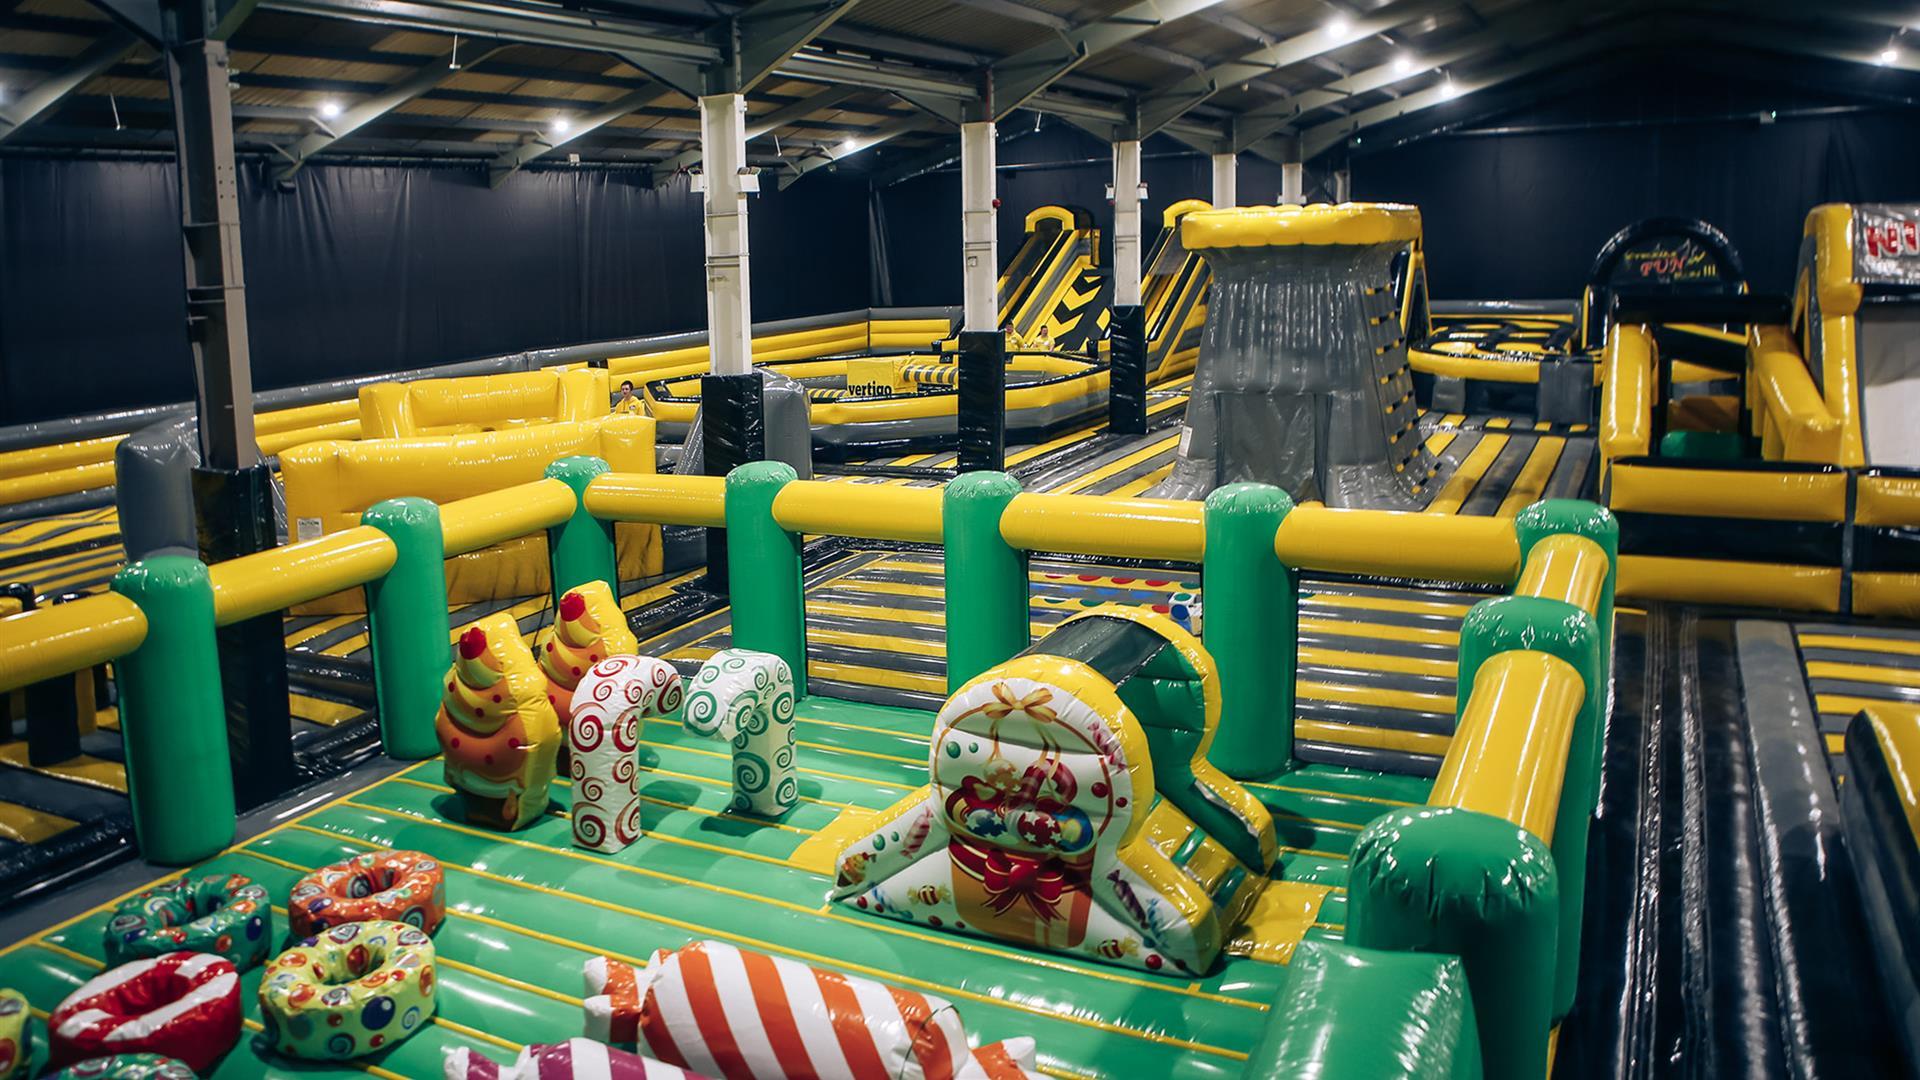 Image shows various inflatables in the main area of We Are Vertigo